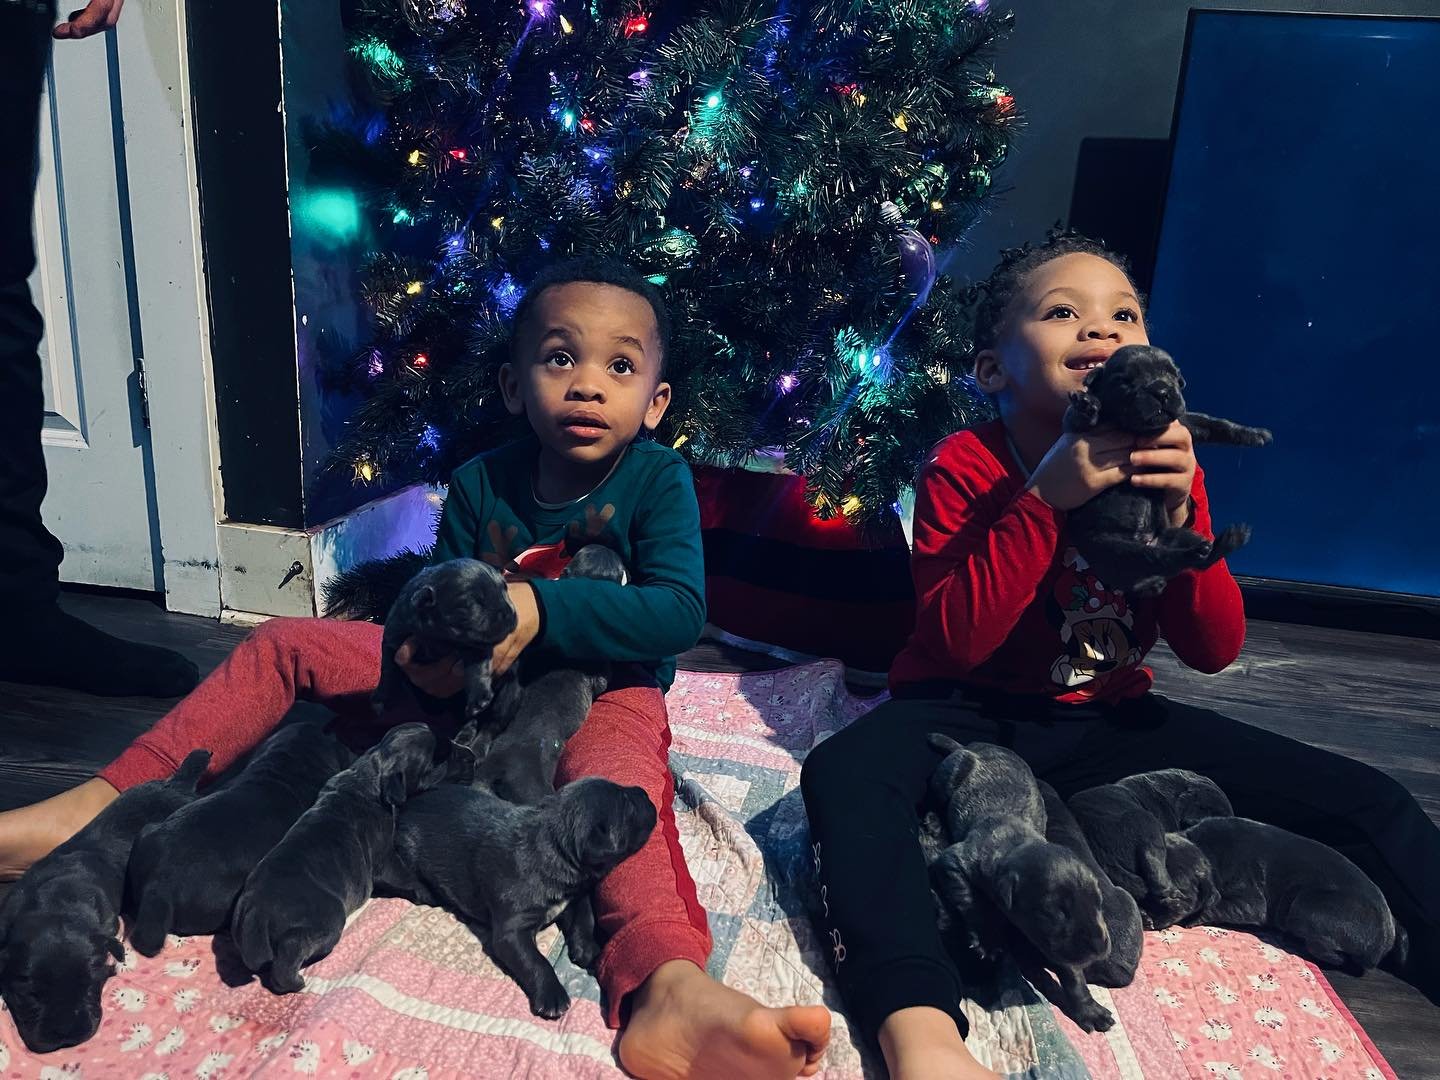 Merry Xmas!! Of the 12 puppies, 9 are still currently available. We still have 2 spots for the half off Xmas special as well. 

#CaneCorsoPuppies #CaneCorso #Xmas #NashvilleDogs #NashvilleDog #DogBreeder #Puppy #Corso #Mastiff